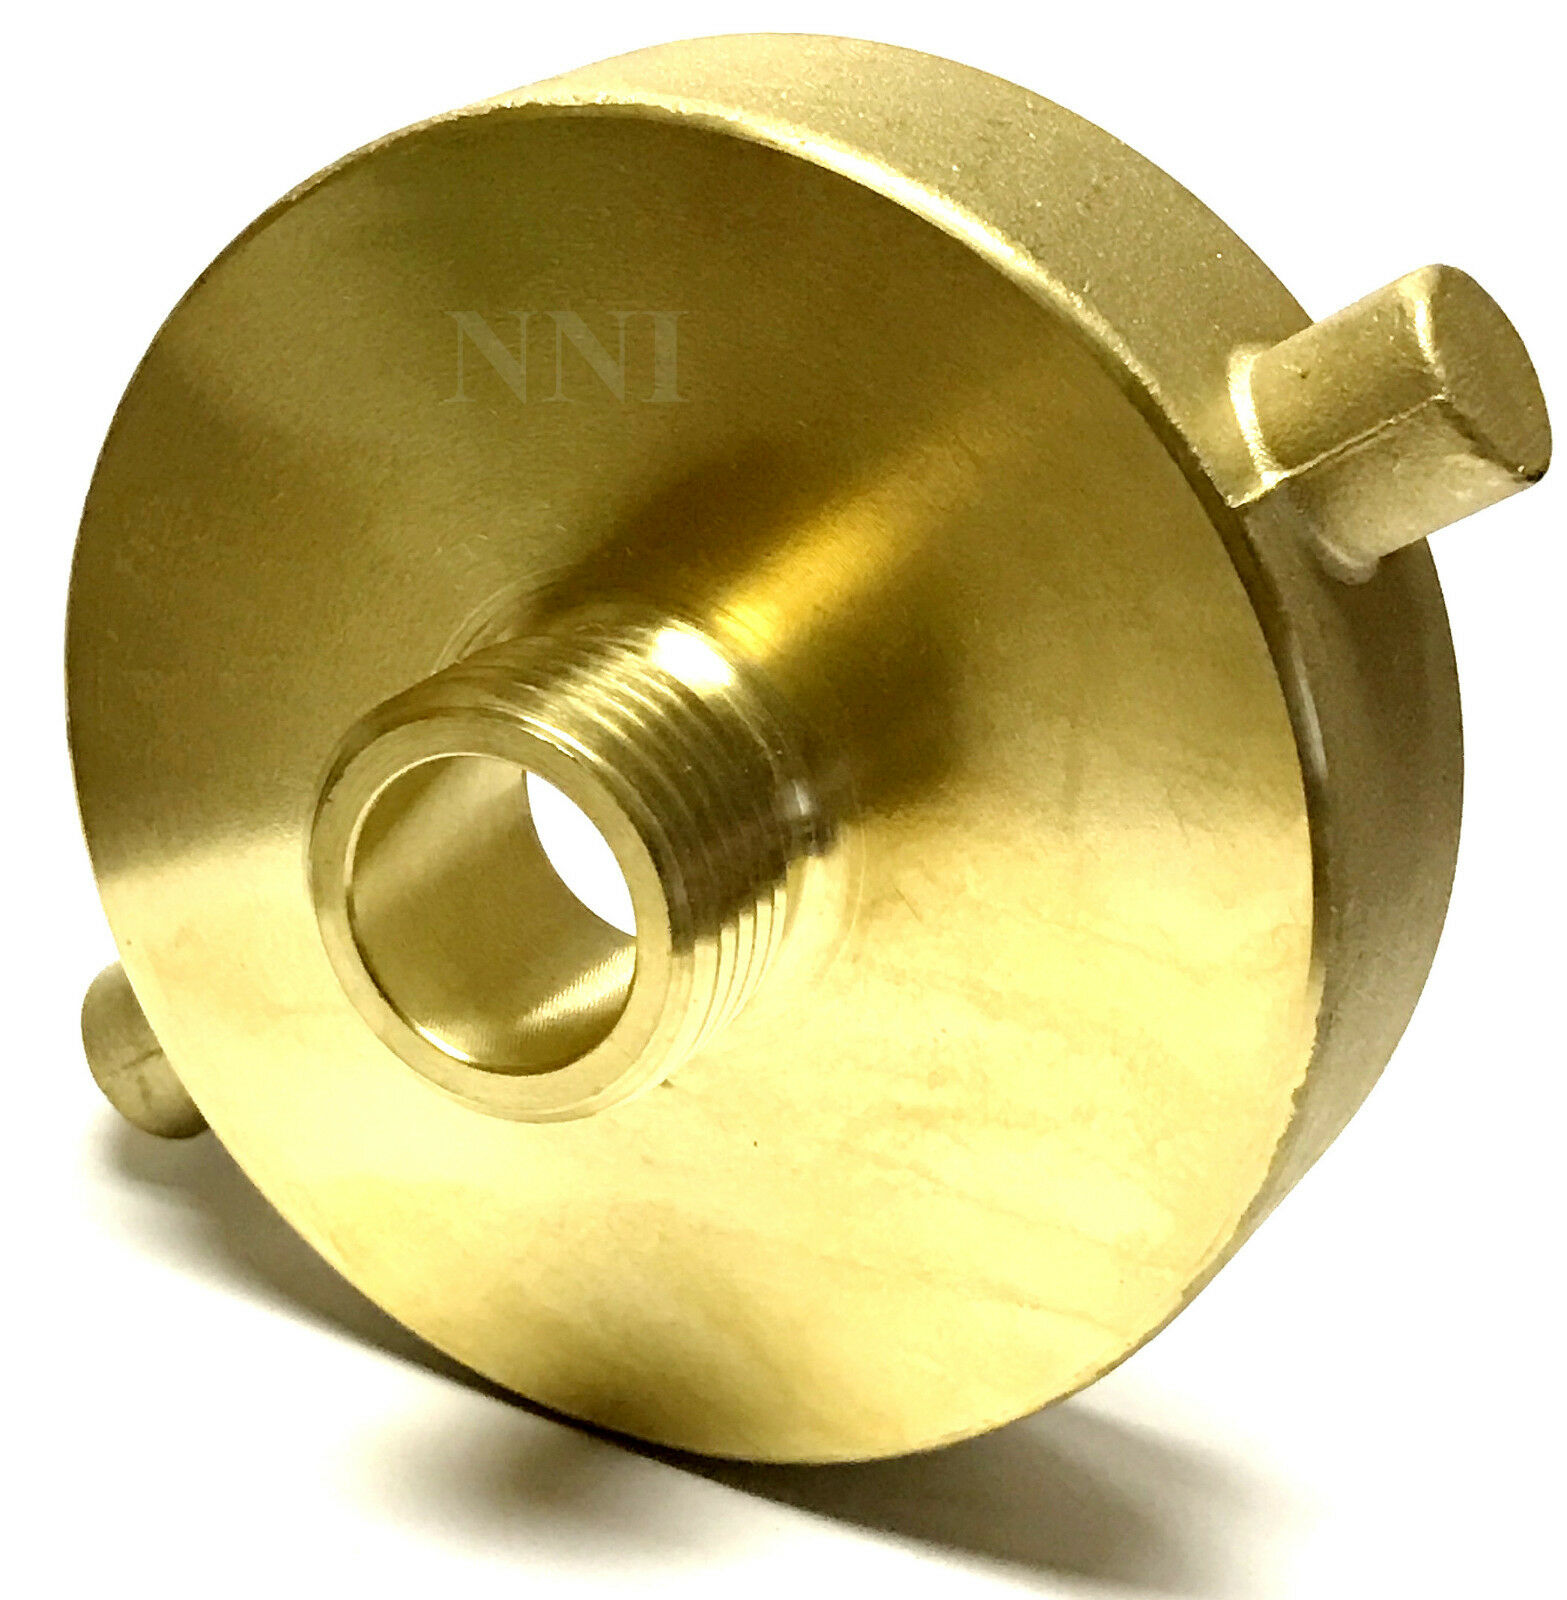 Nni Fire Hydrant Adapter 2-1/2" Female Nst-nh X 3/4" Male Ght Garden Hose